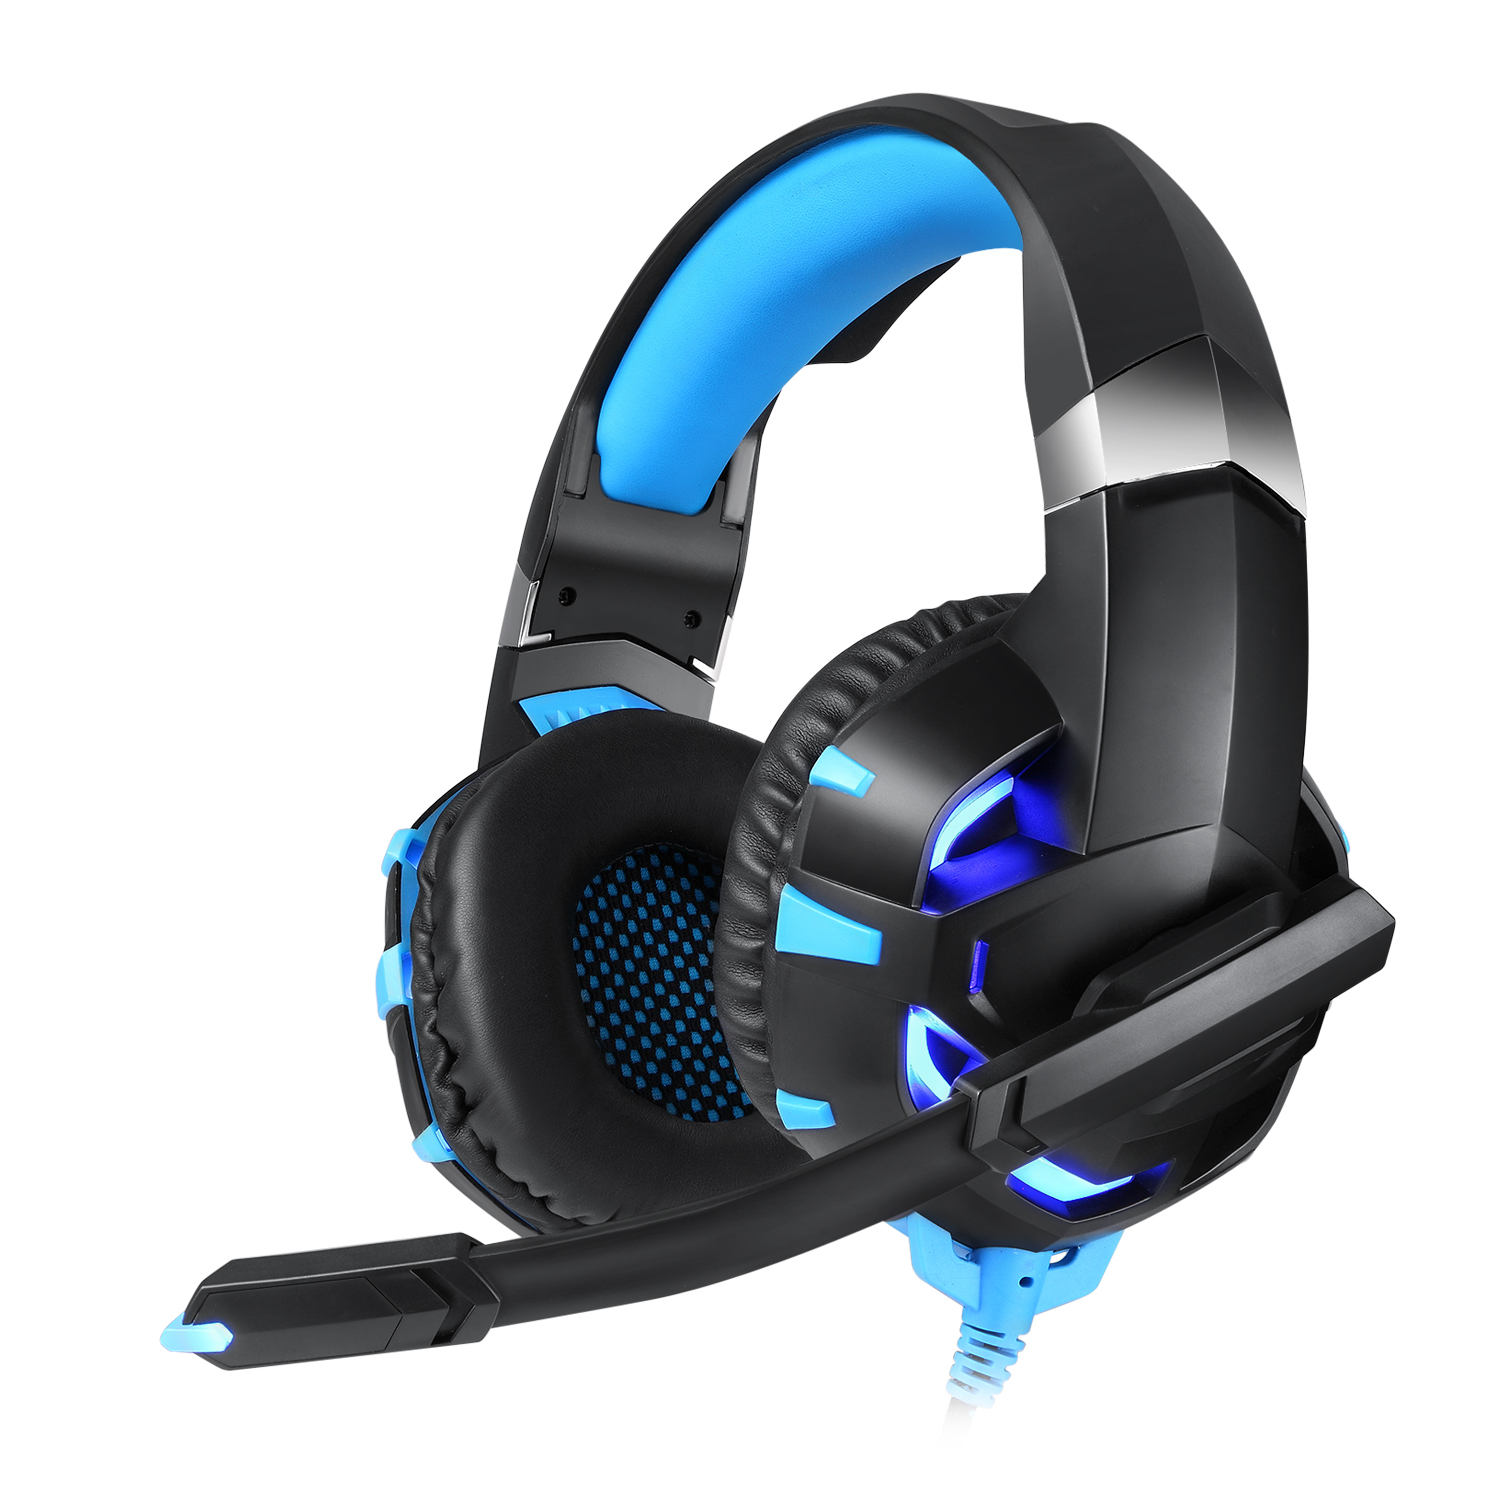 Tyshen Popular Wired Gaming Headset Headphones 7.1 Surround Gamer Headphone USB Blue LED Light Display Cheap Wire Colorful Computer Stereo Earphone